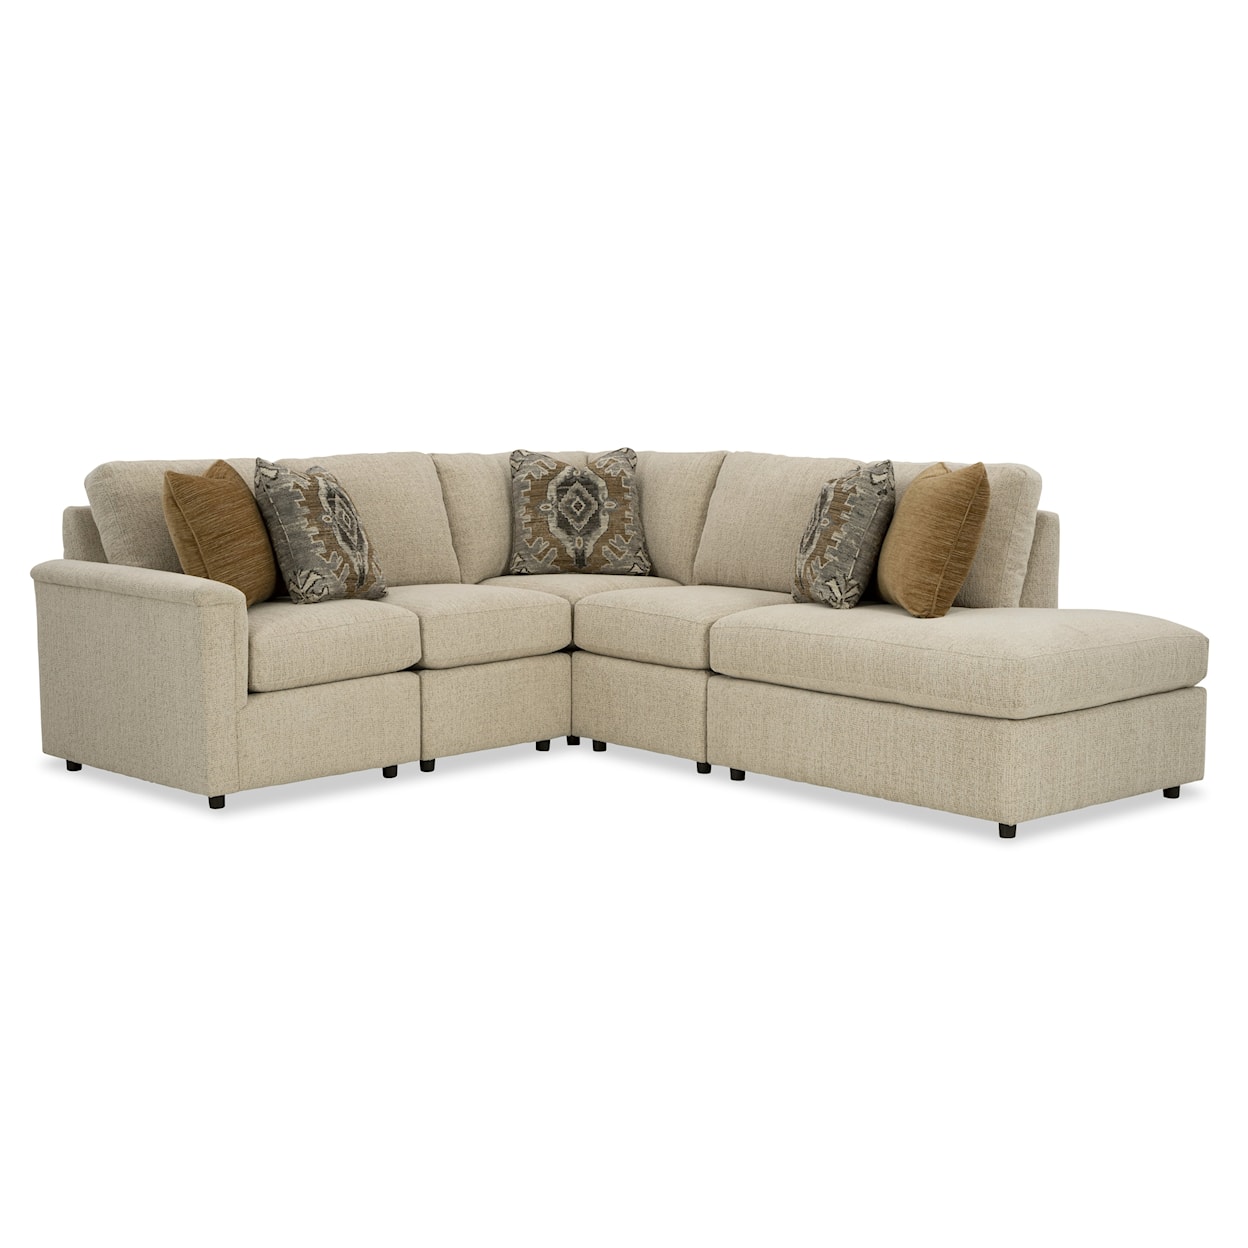 Craftmaster 739050 5-Piece Sectional with Right Chaise